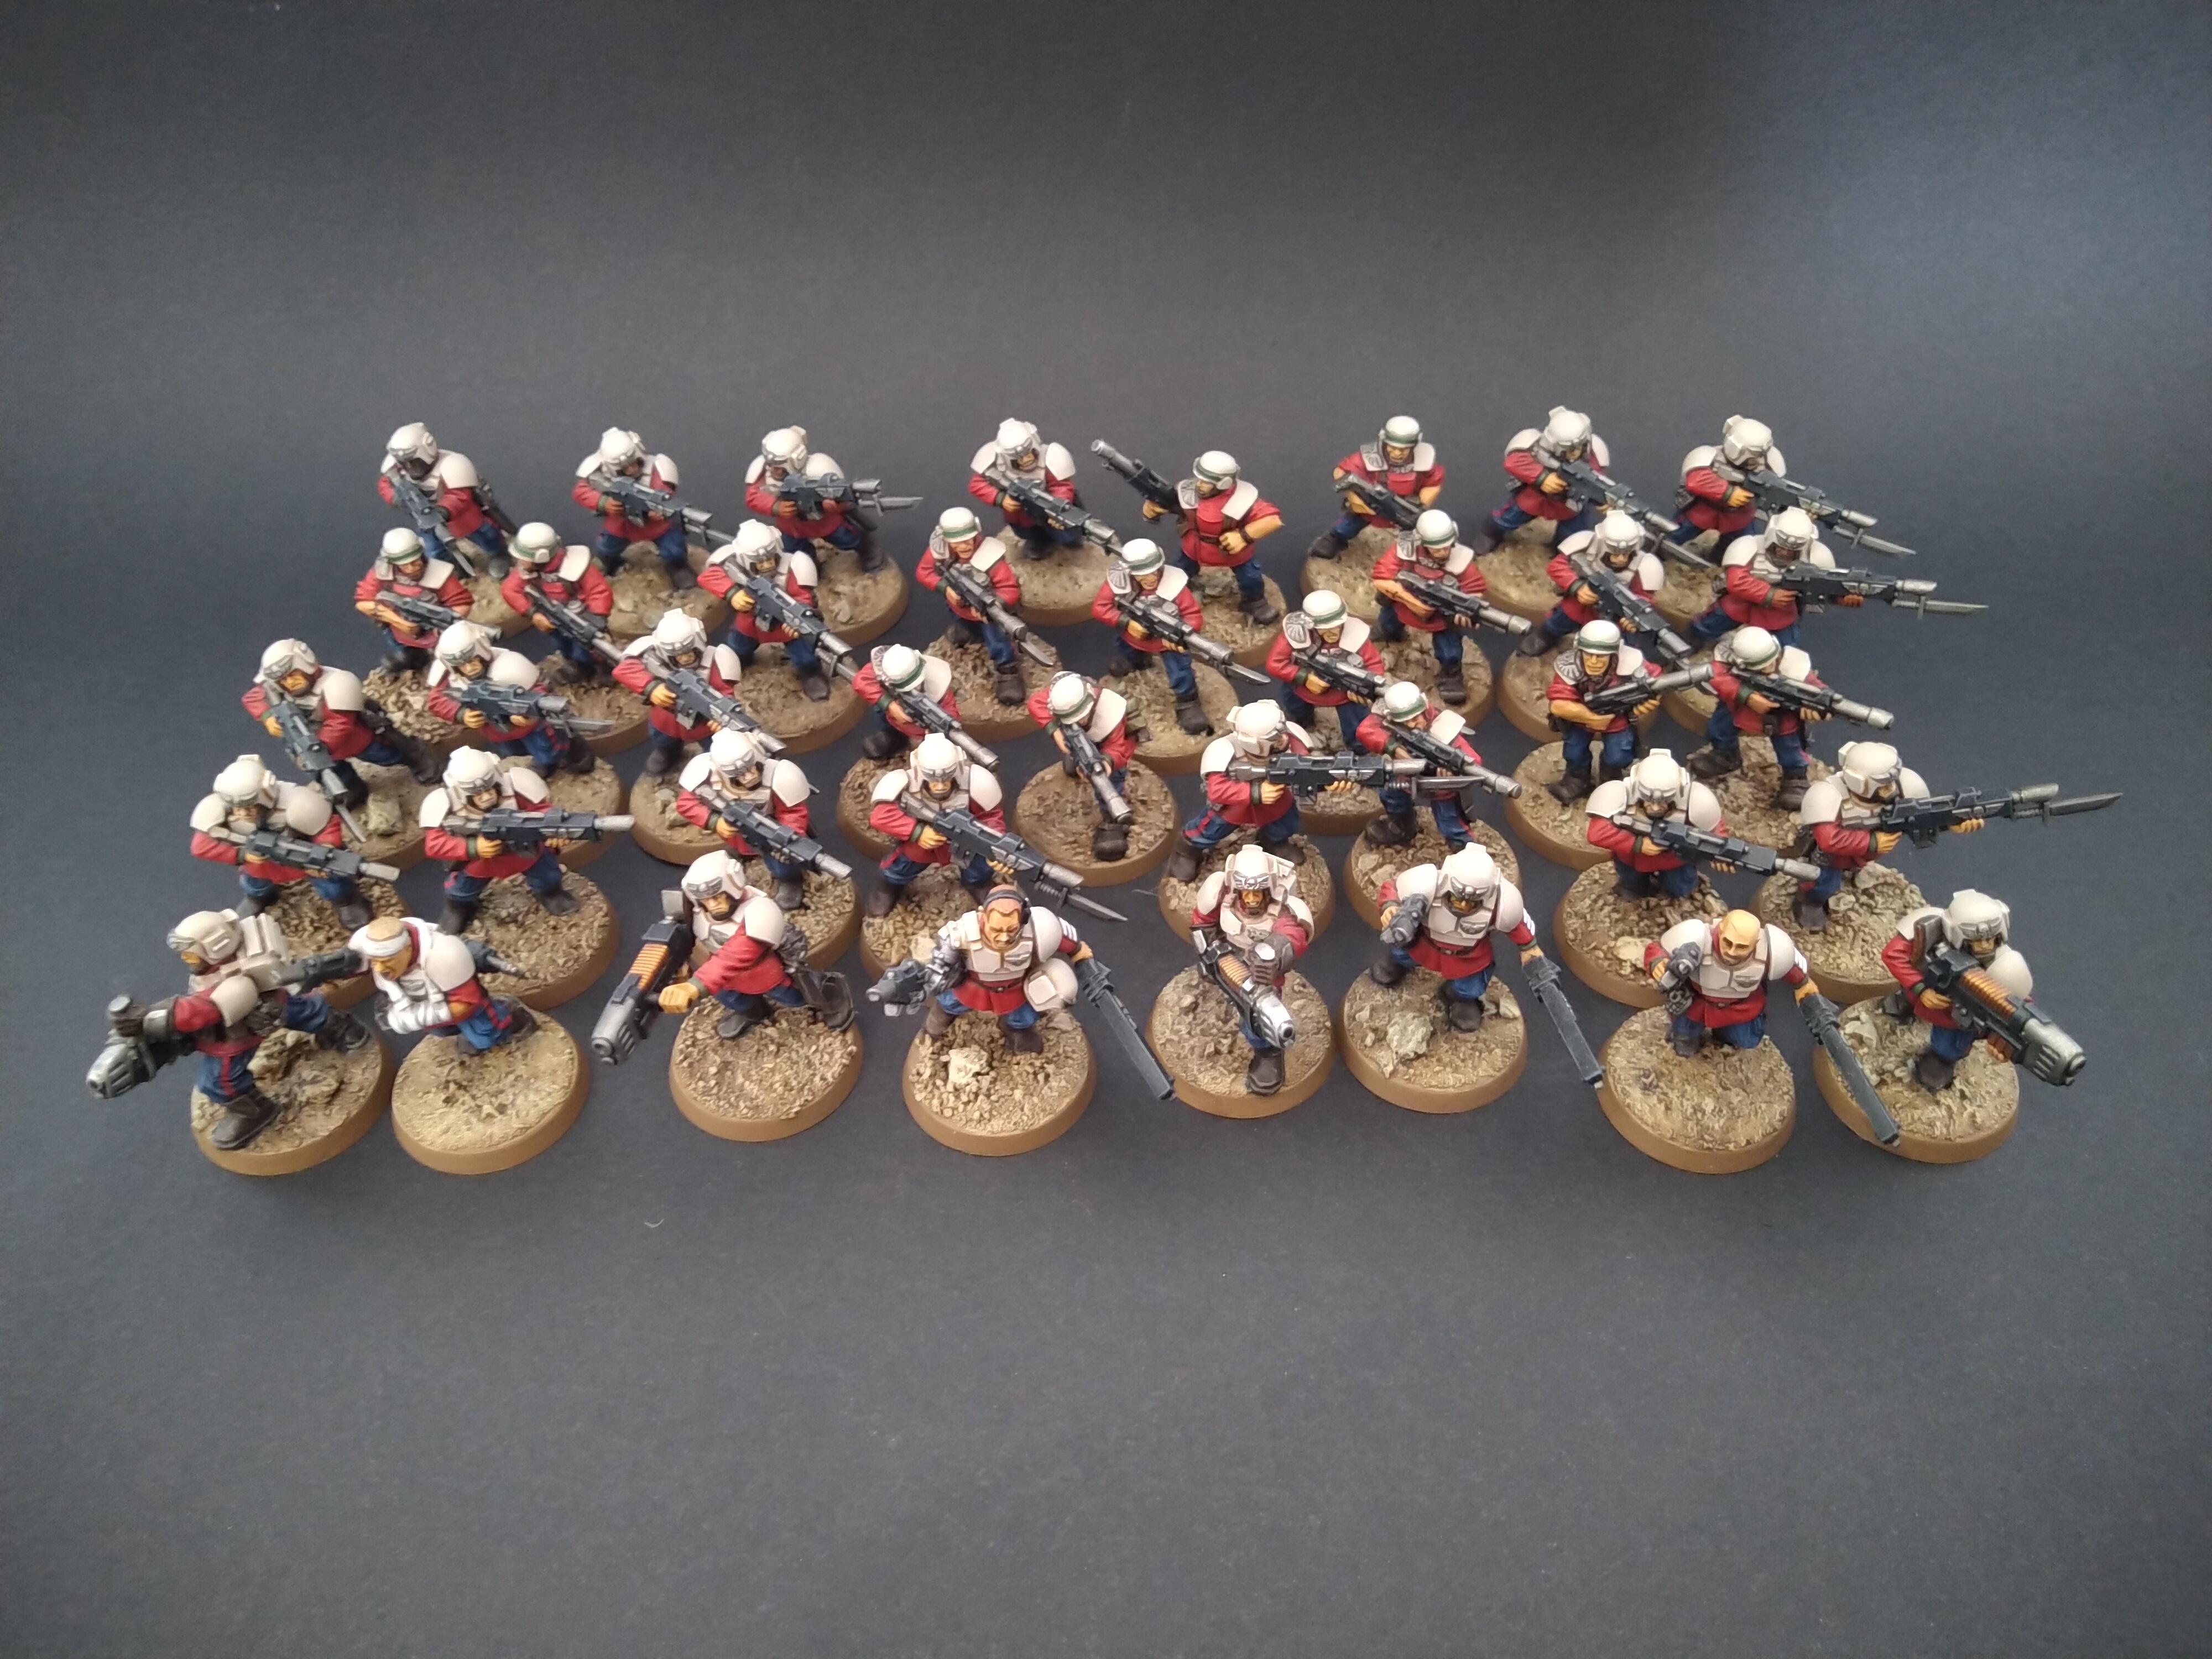 19th Century, All Troop Army, Astra Militarum, Imperial Guard, Redcoats, Troops, Warhammer 40,000